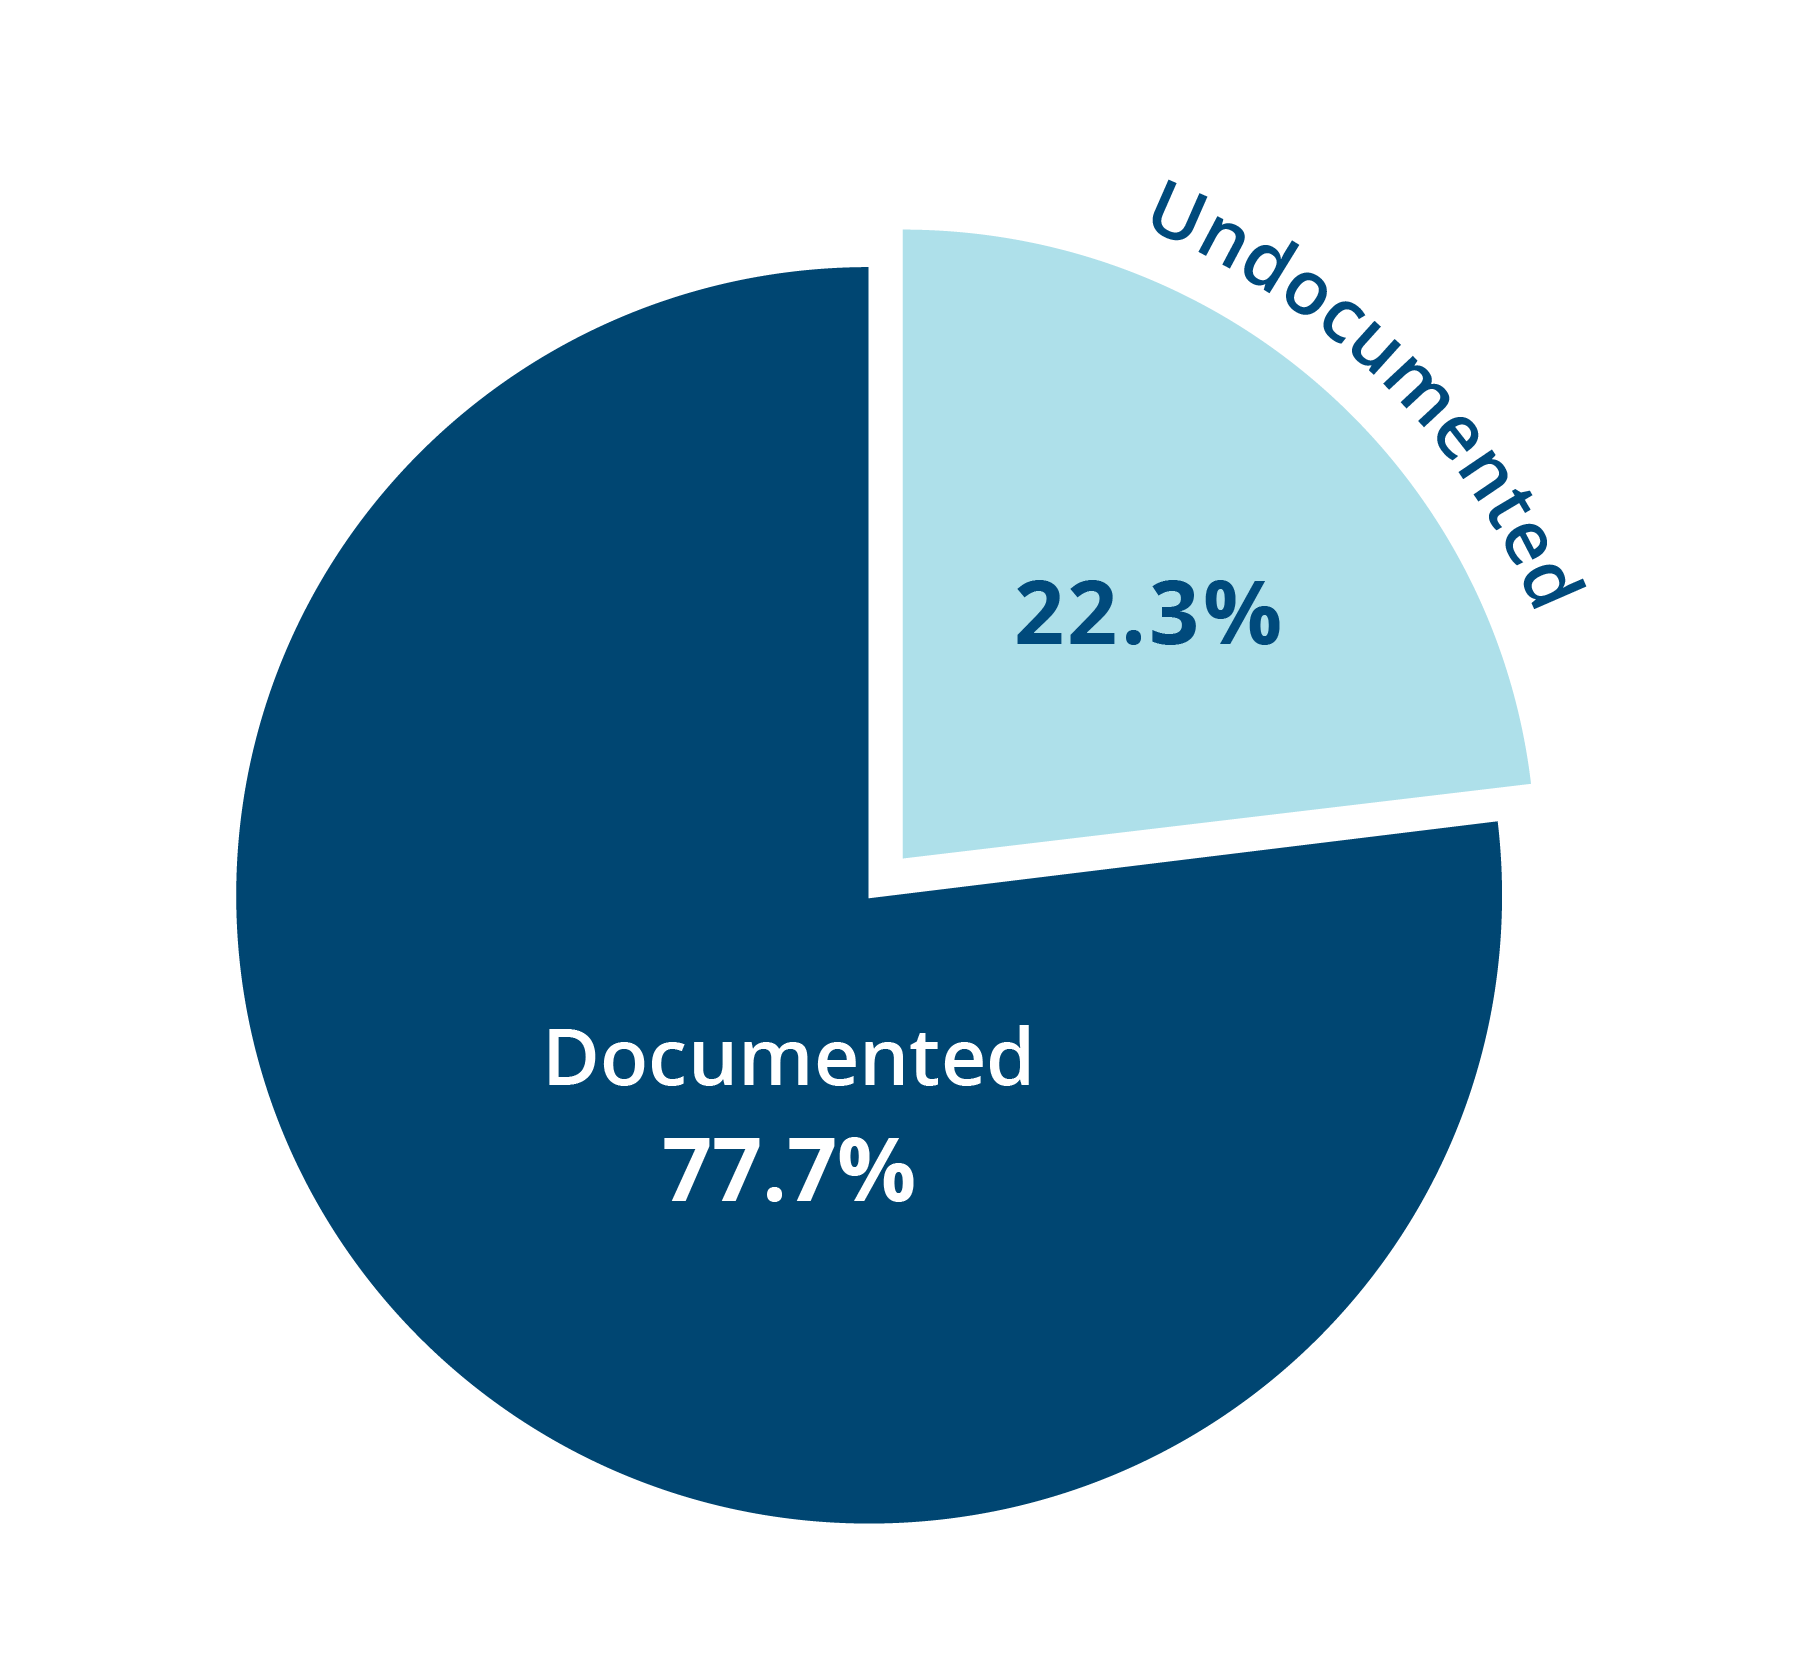 Pie chart showing that the majority of U.S. immigrants (77.7%) are documented.